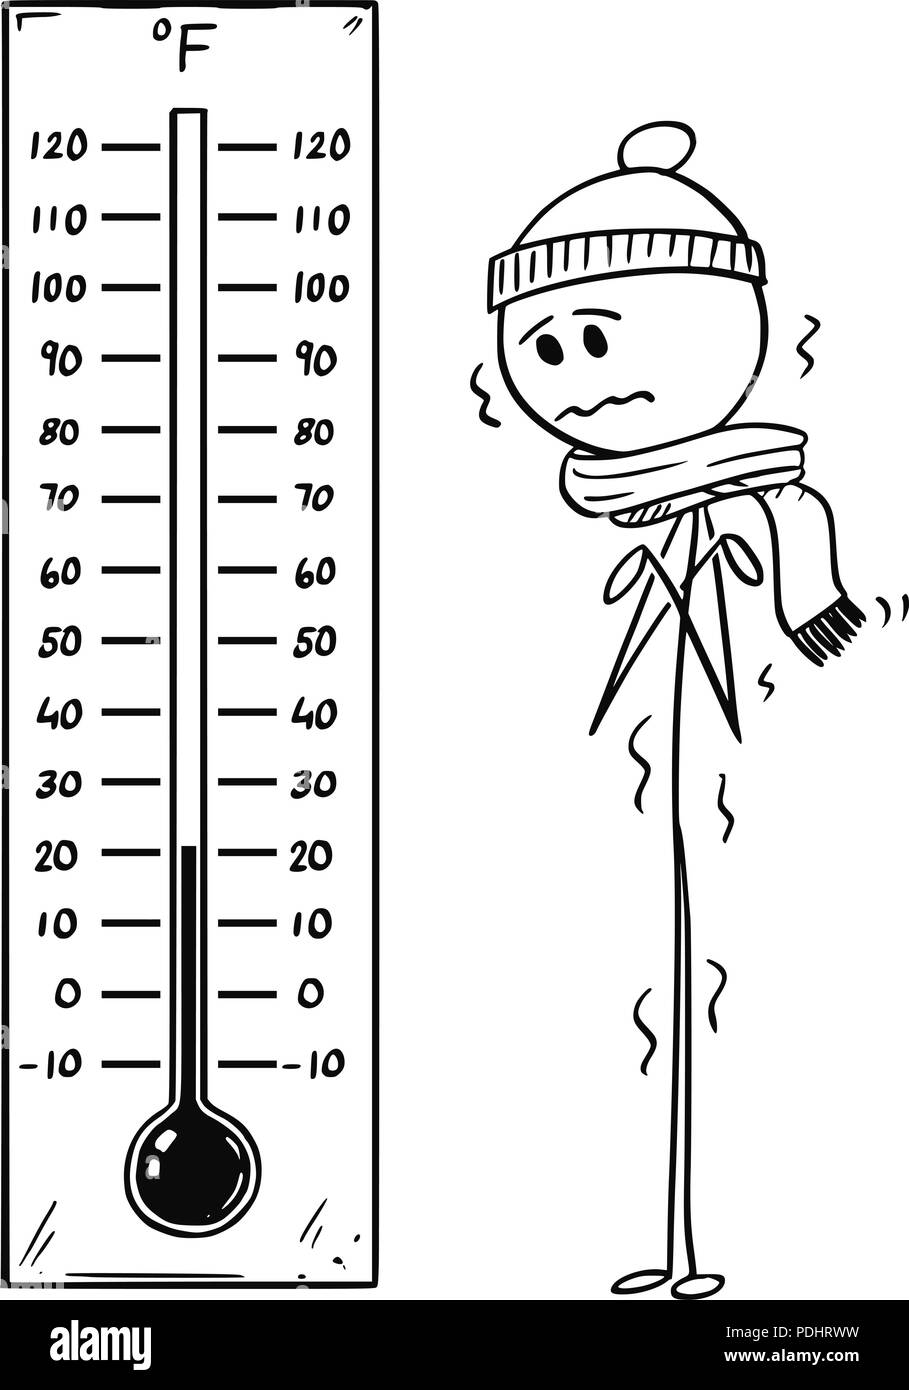 Cartoon of Chilled Man Looking at Big Fahrenheit Thermometer Showing Low Temperature Stock Vector